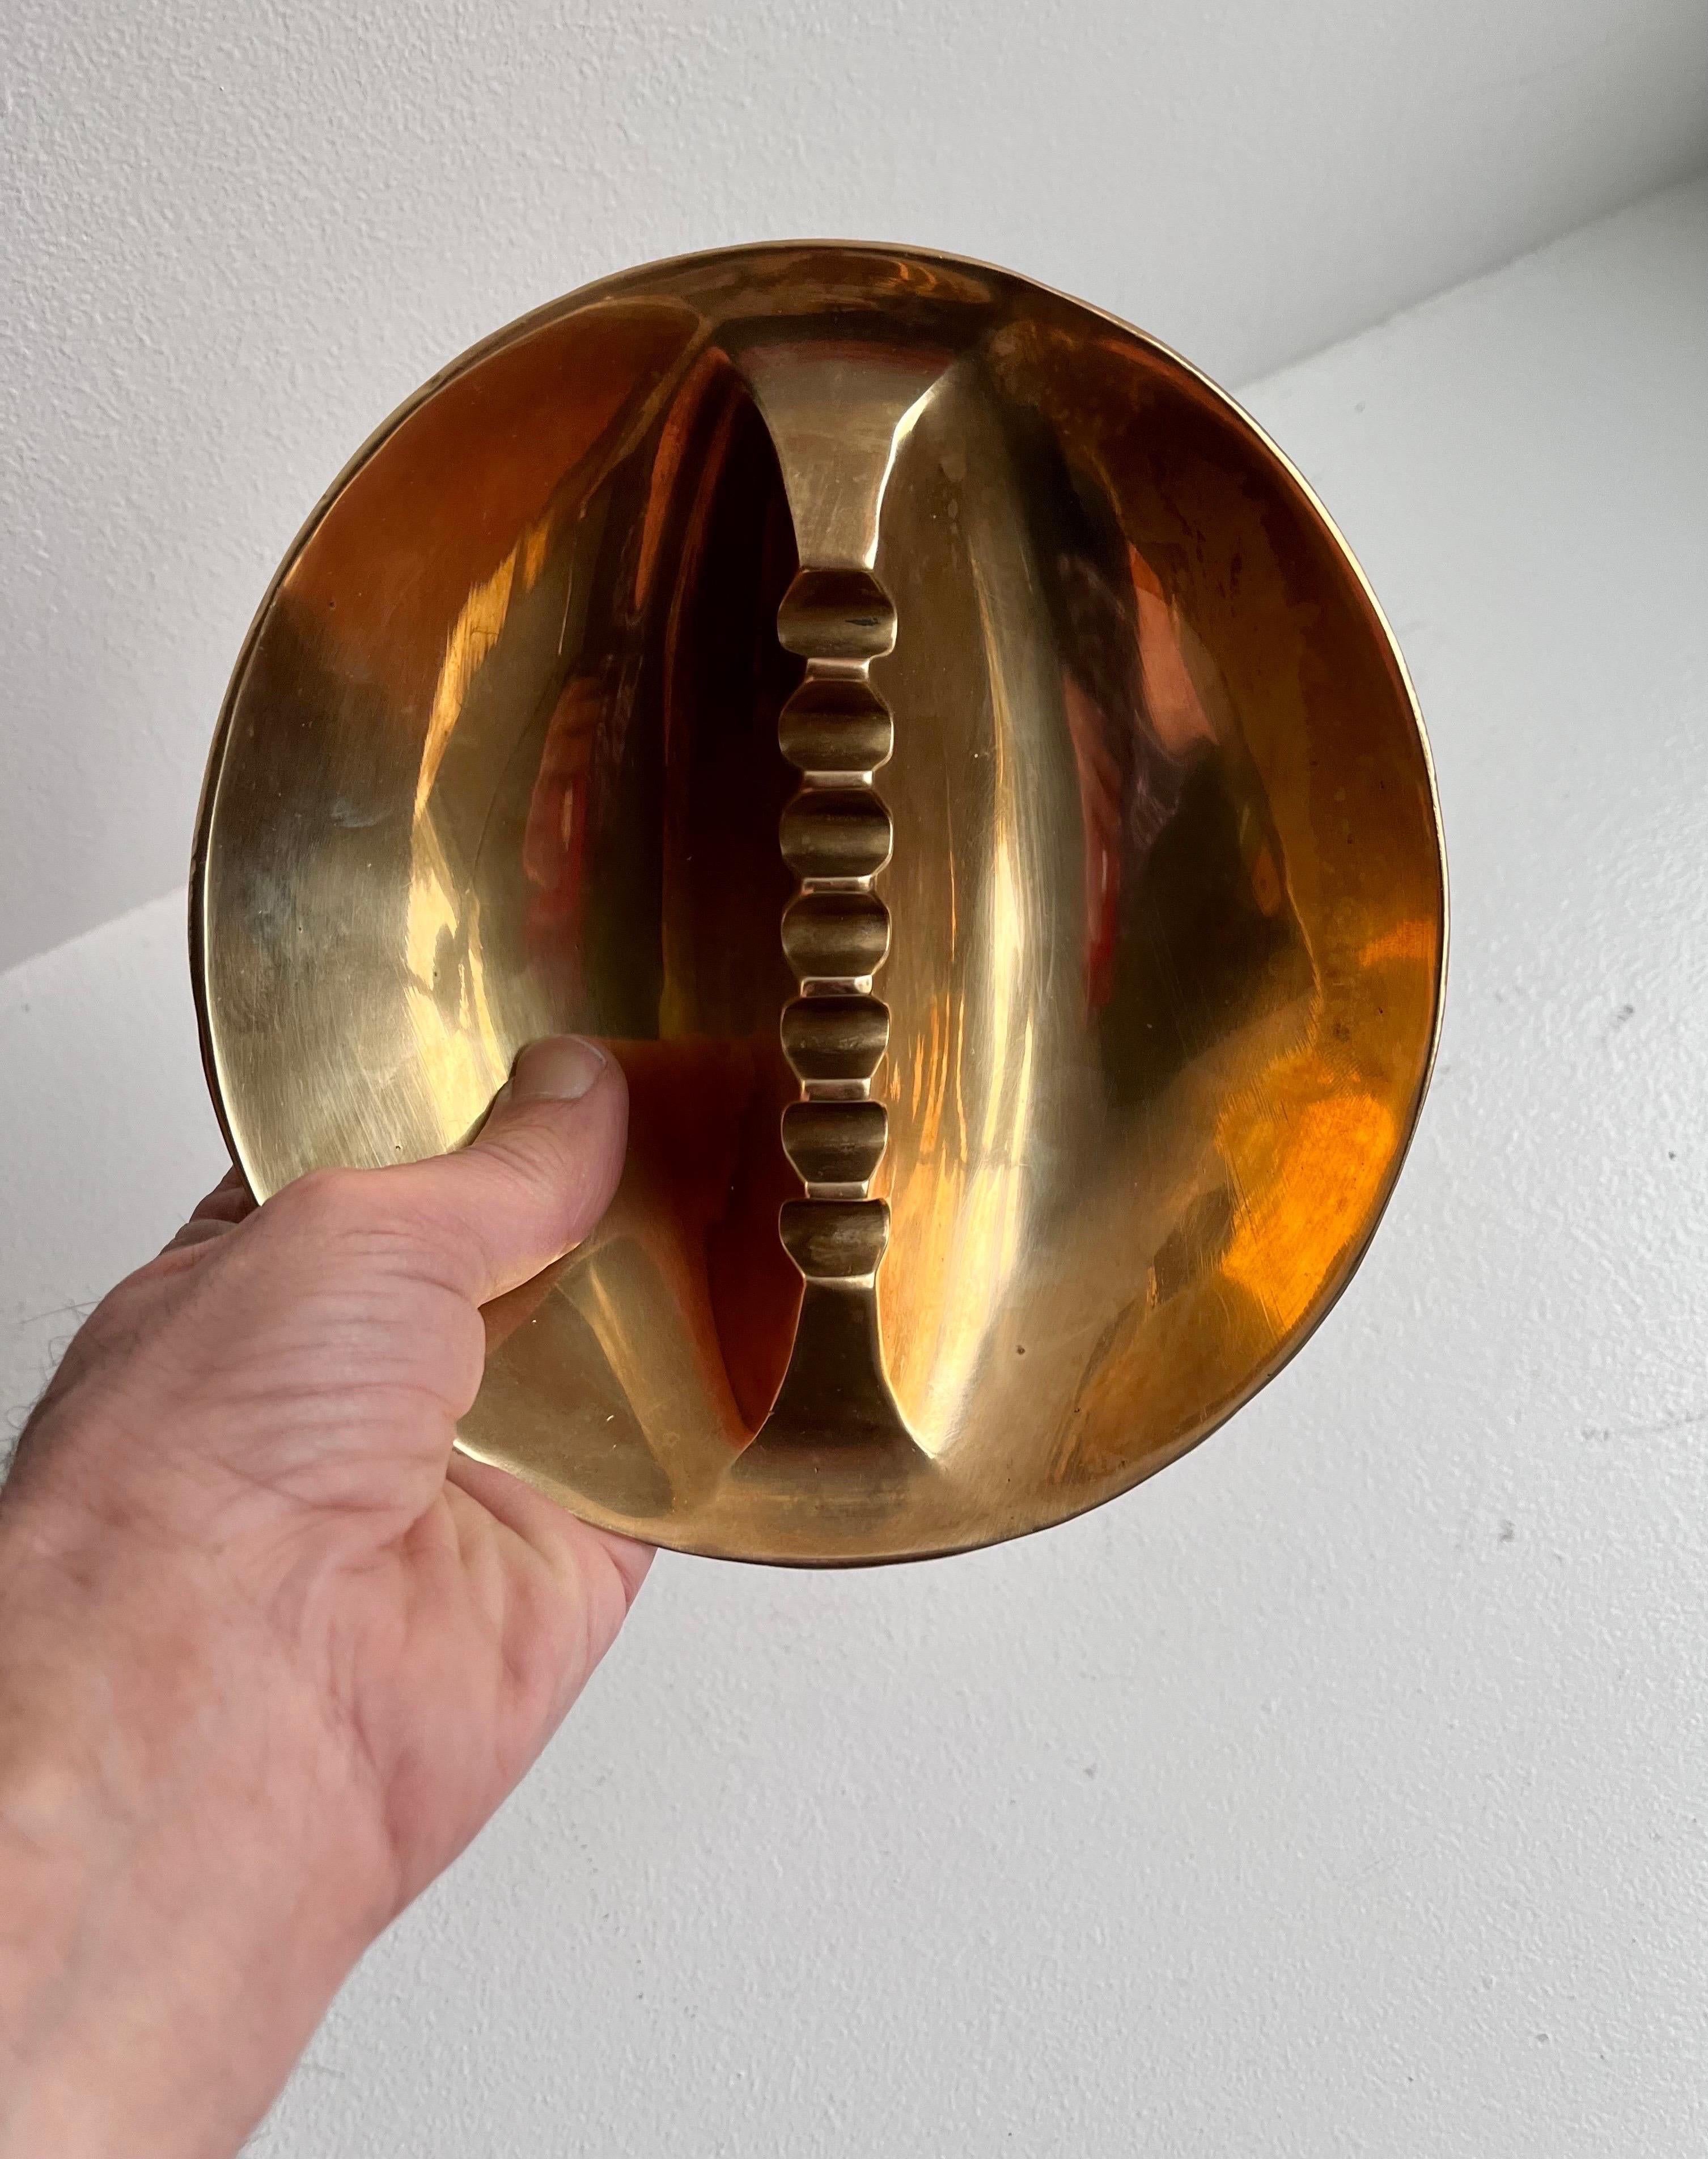 Solid Brass Ashtray
circa 1970
nice sculptural design
in the style of Werkstätte Carl Auböck